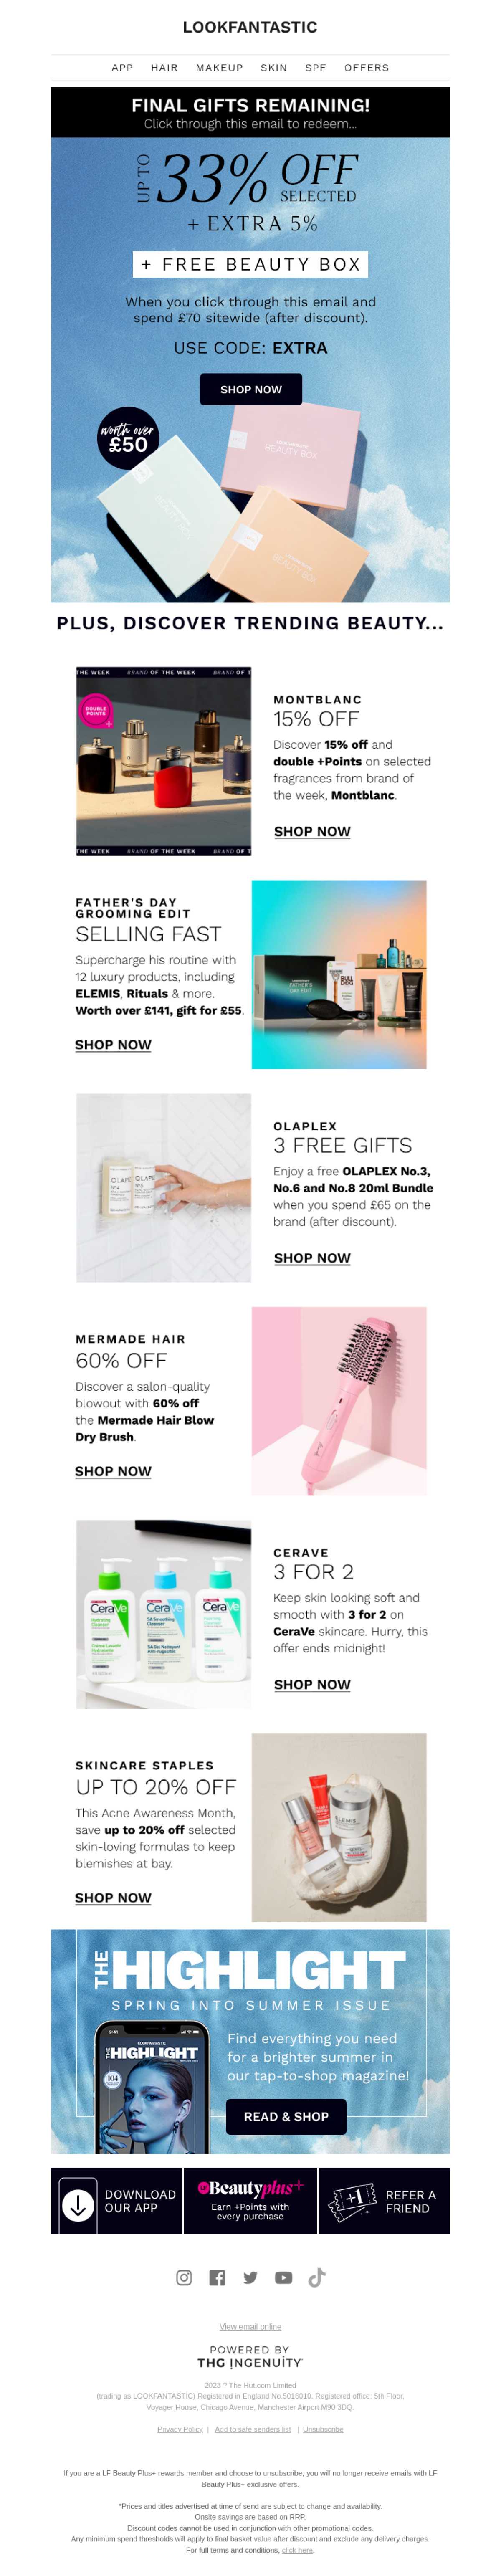 FINAL GIFTS  Up To 33% + EXTRA 5% + FREE Beauty Box (Worth Over 50)